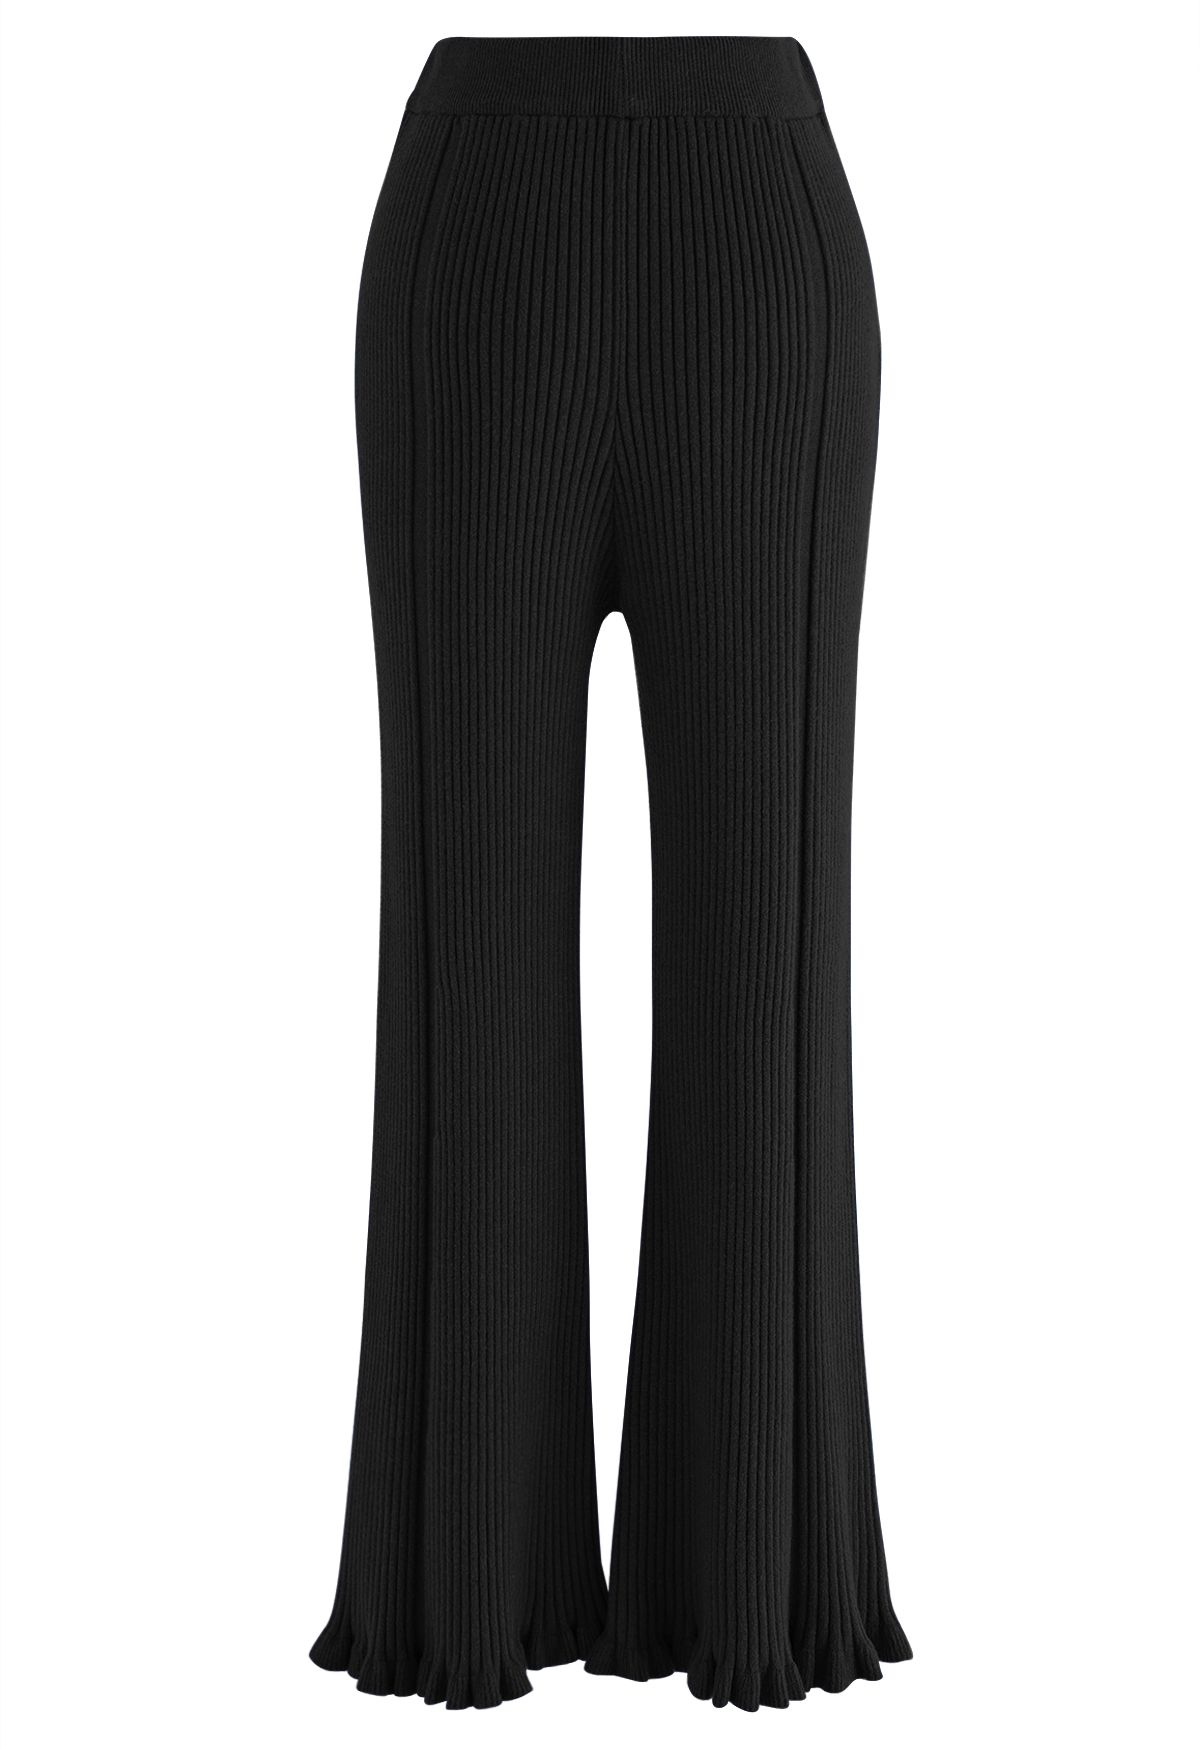 Ruffle Flare Hem Ribbed Knit Pants in Black - Retro, Indie and Unique  Fashion